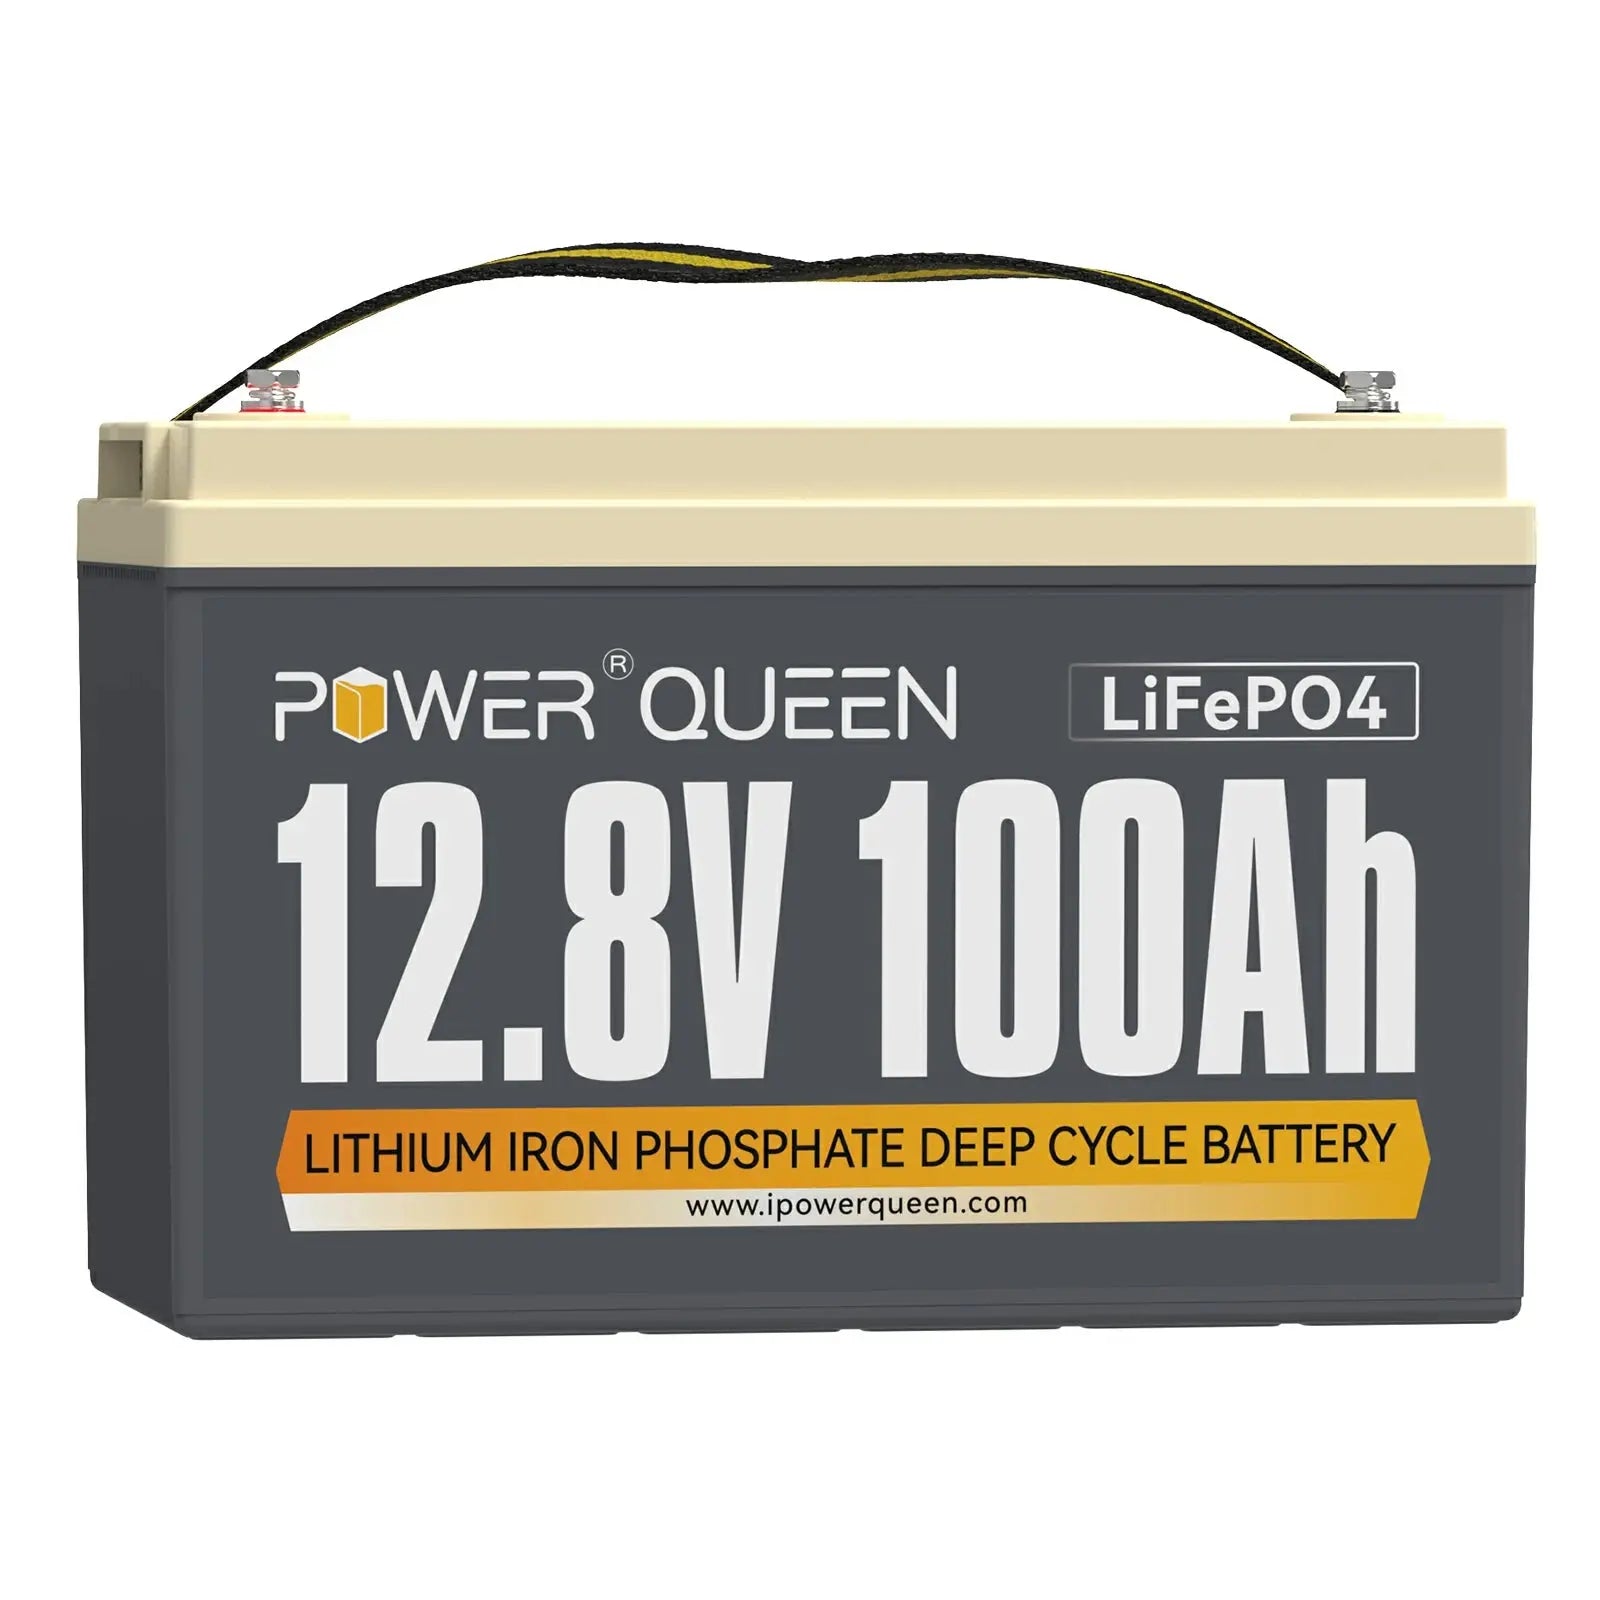 【Like New】Power Queen 12.8V 100Ah LiFePO4 Battery, Built-in 100A BMS Power Queen